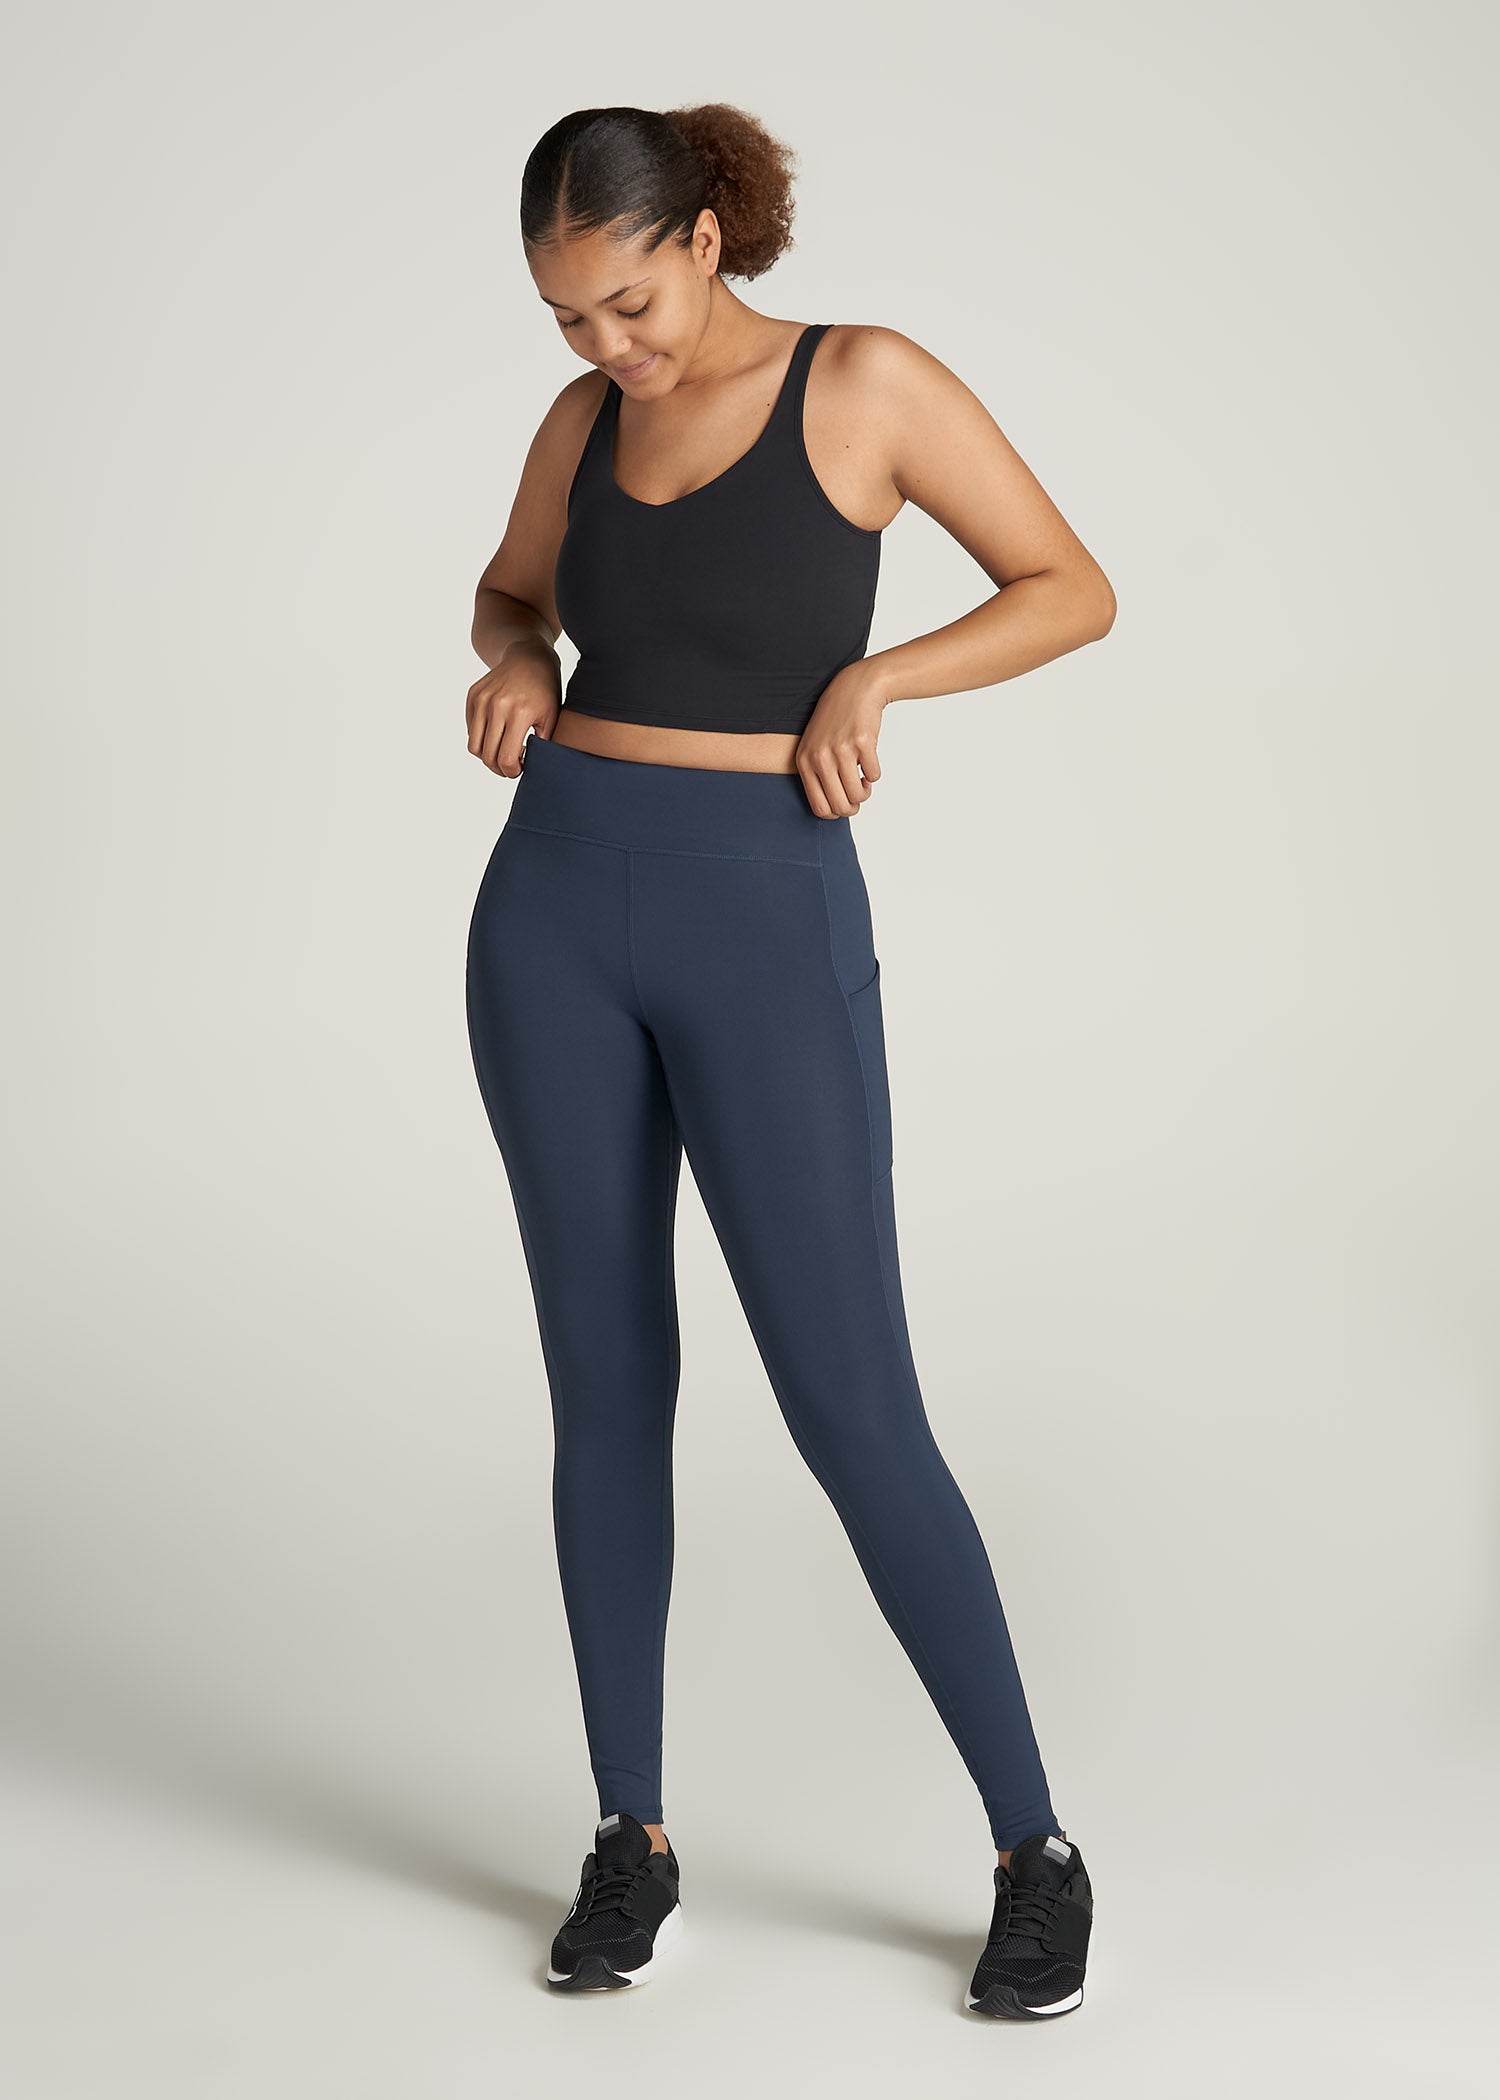 Women's Active Tall Leggings with Pockets, American Tall